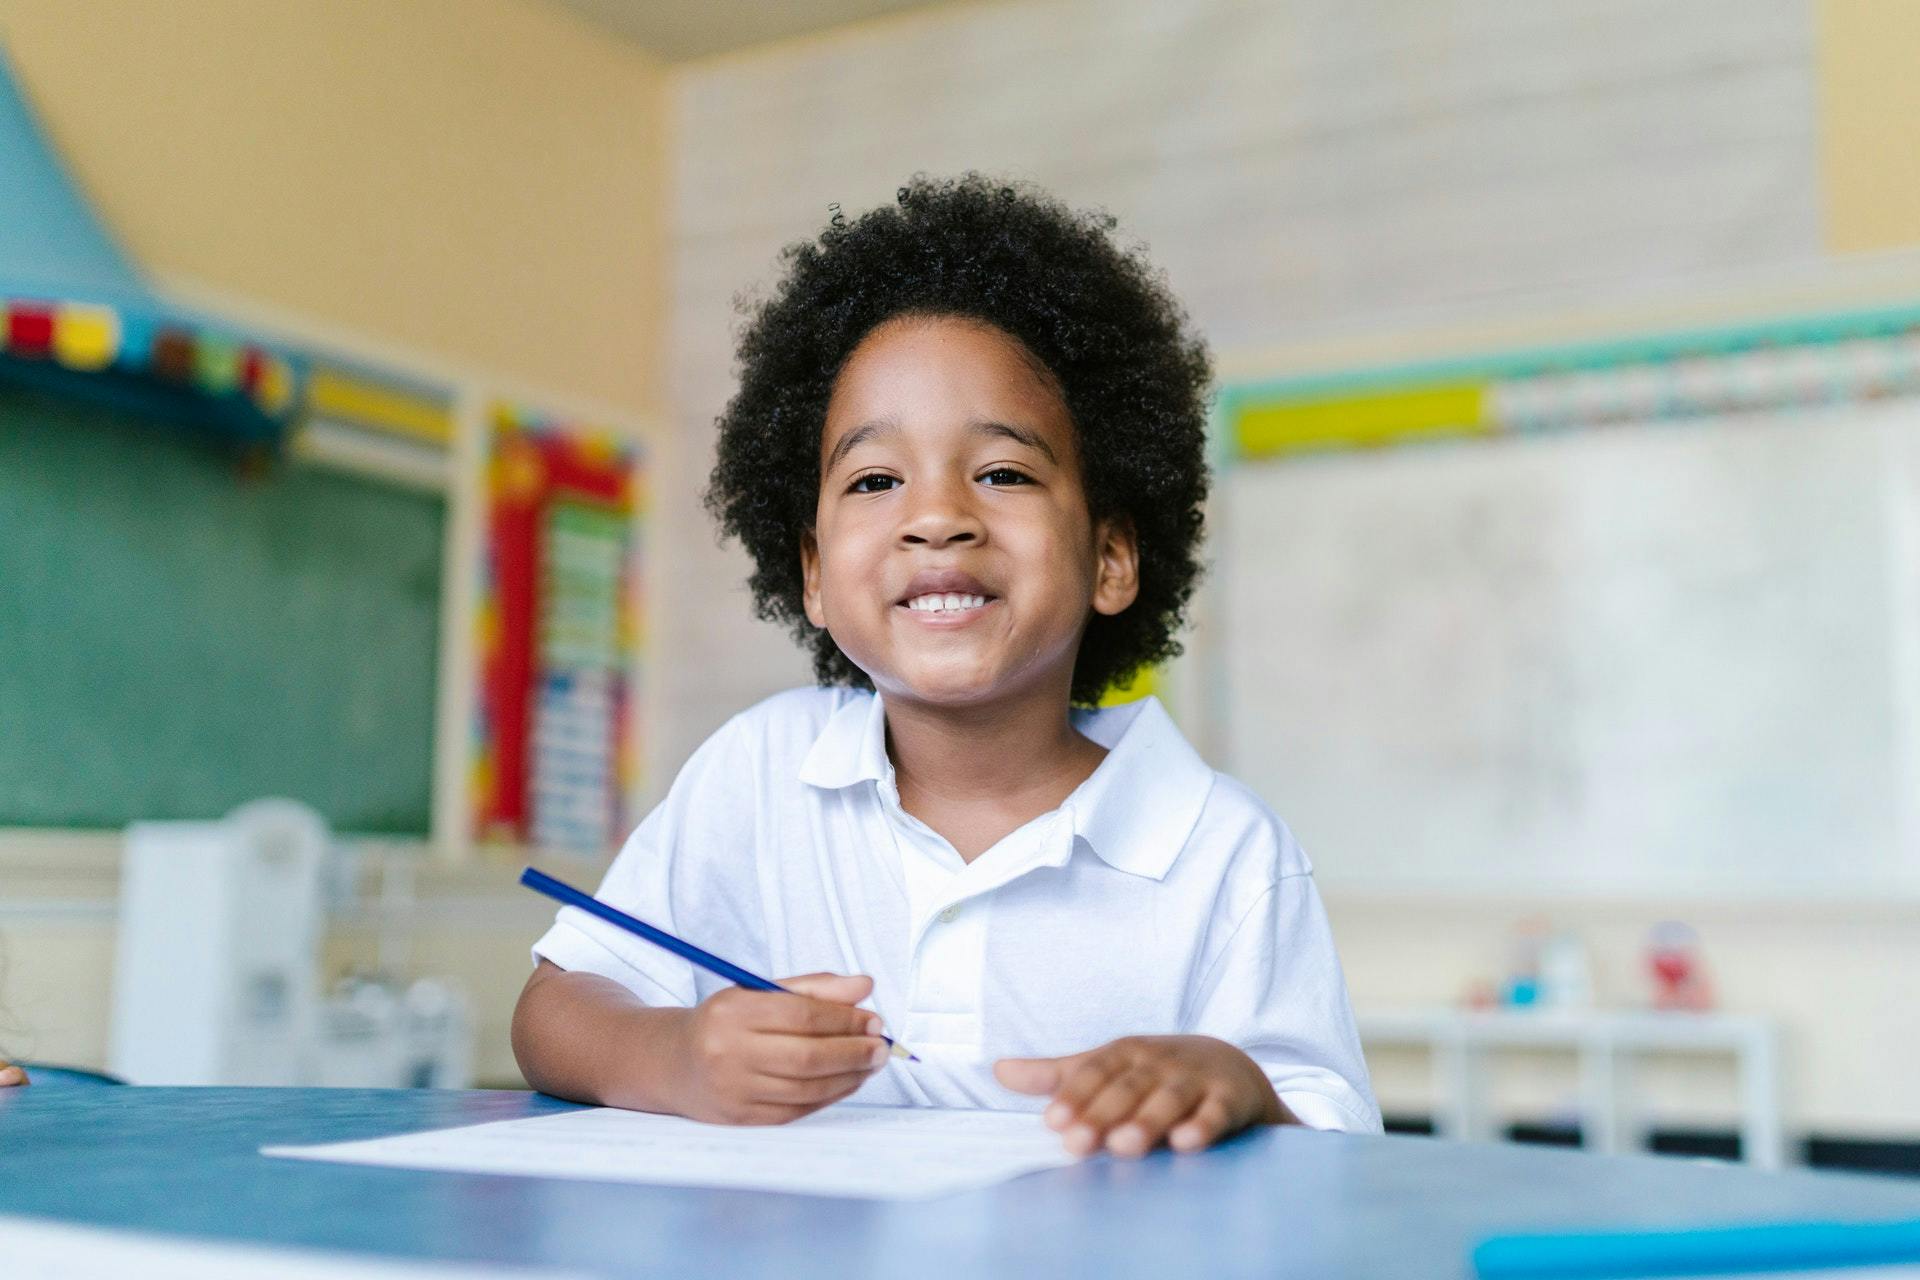 Young boy smiles while sitting at a table holding a pencil.